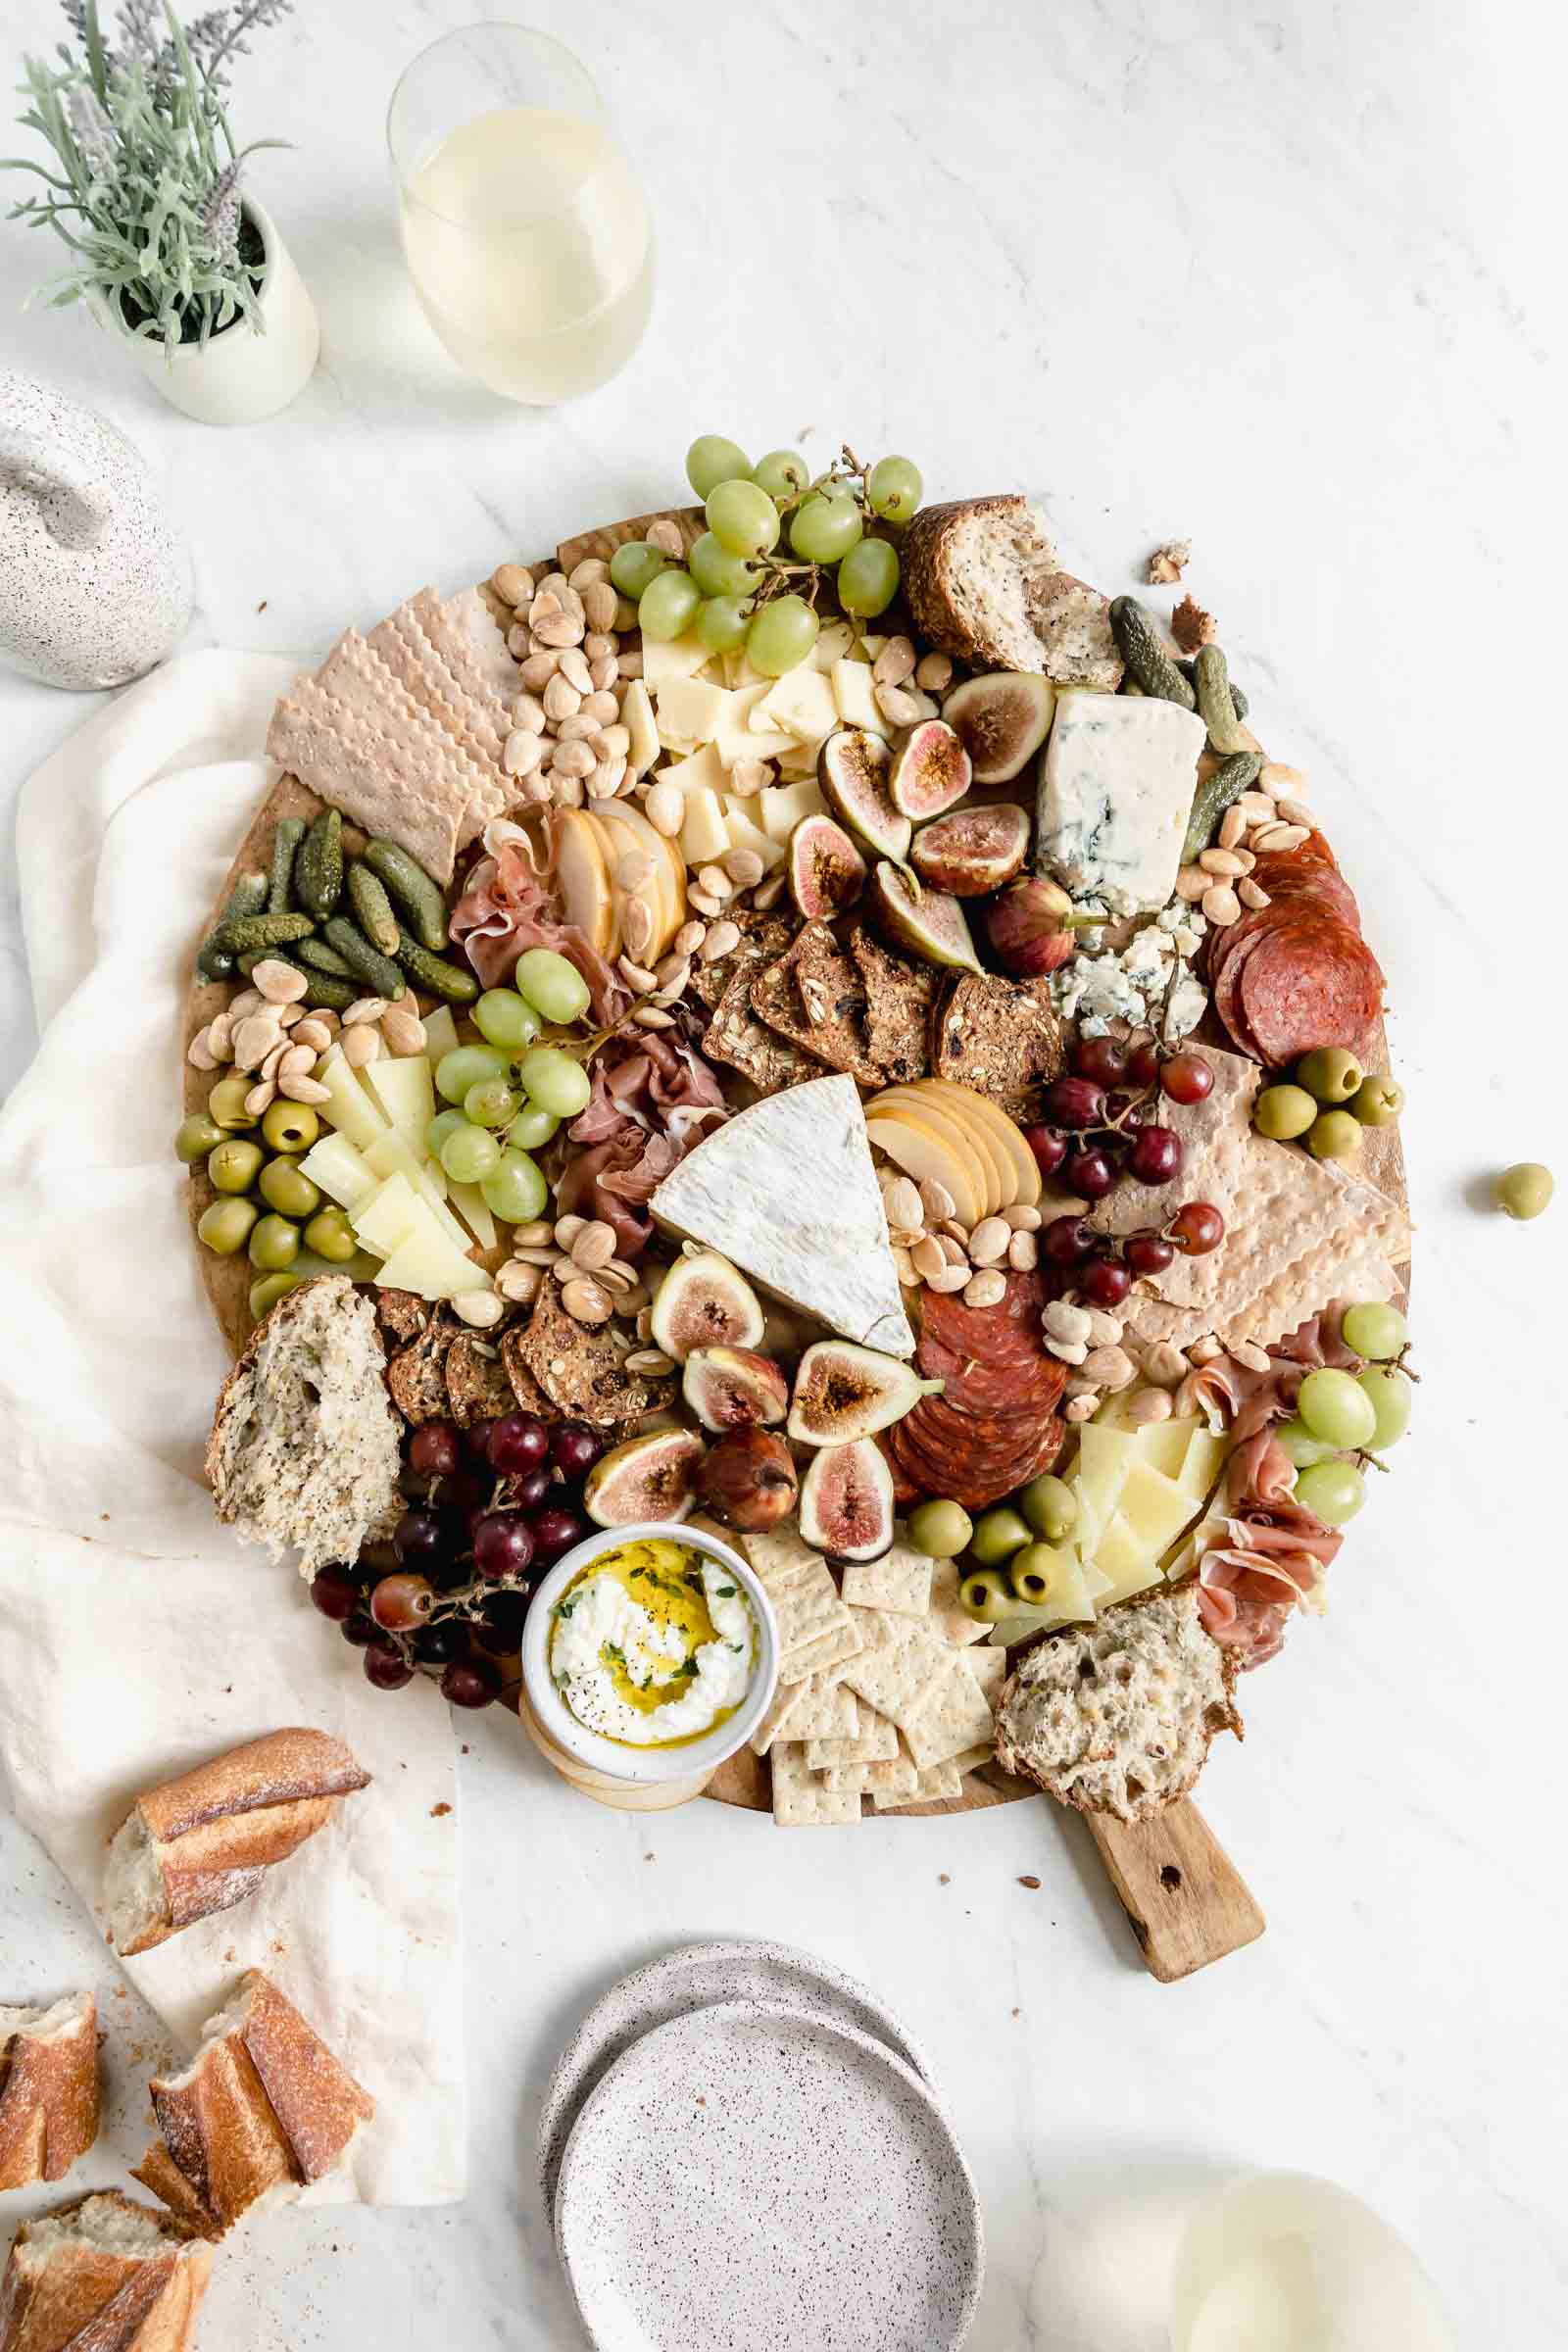 fill in cheese board gaps with marcona almonds to complete cheeseboard